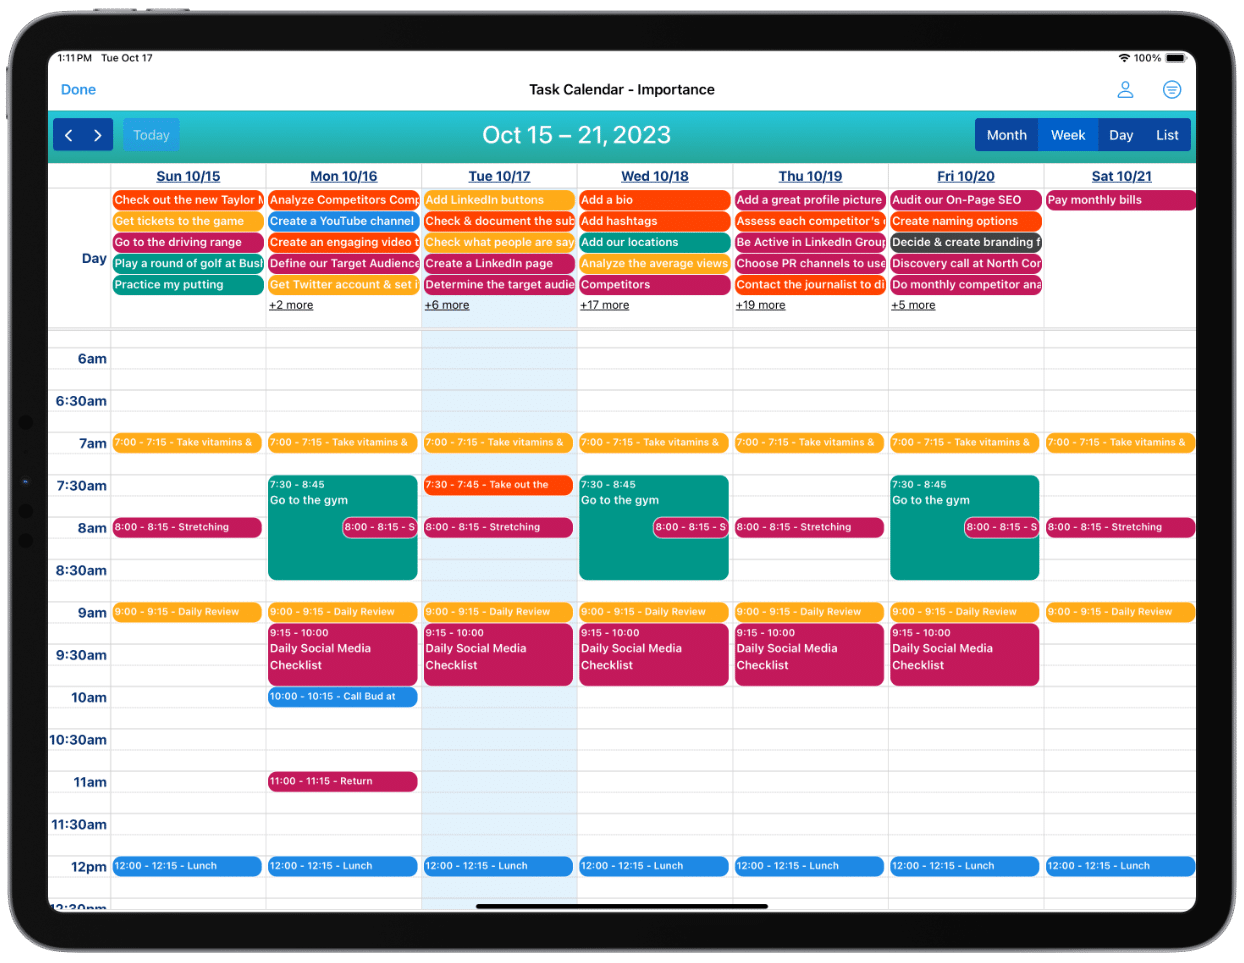 This image shows the in-app Calendar with the Week View on iPad Pro.